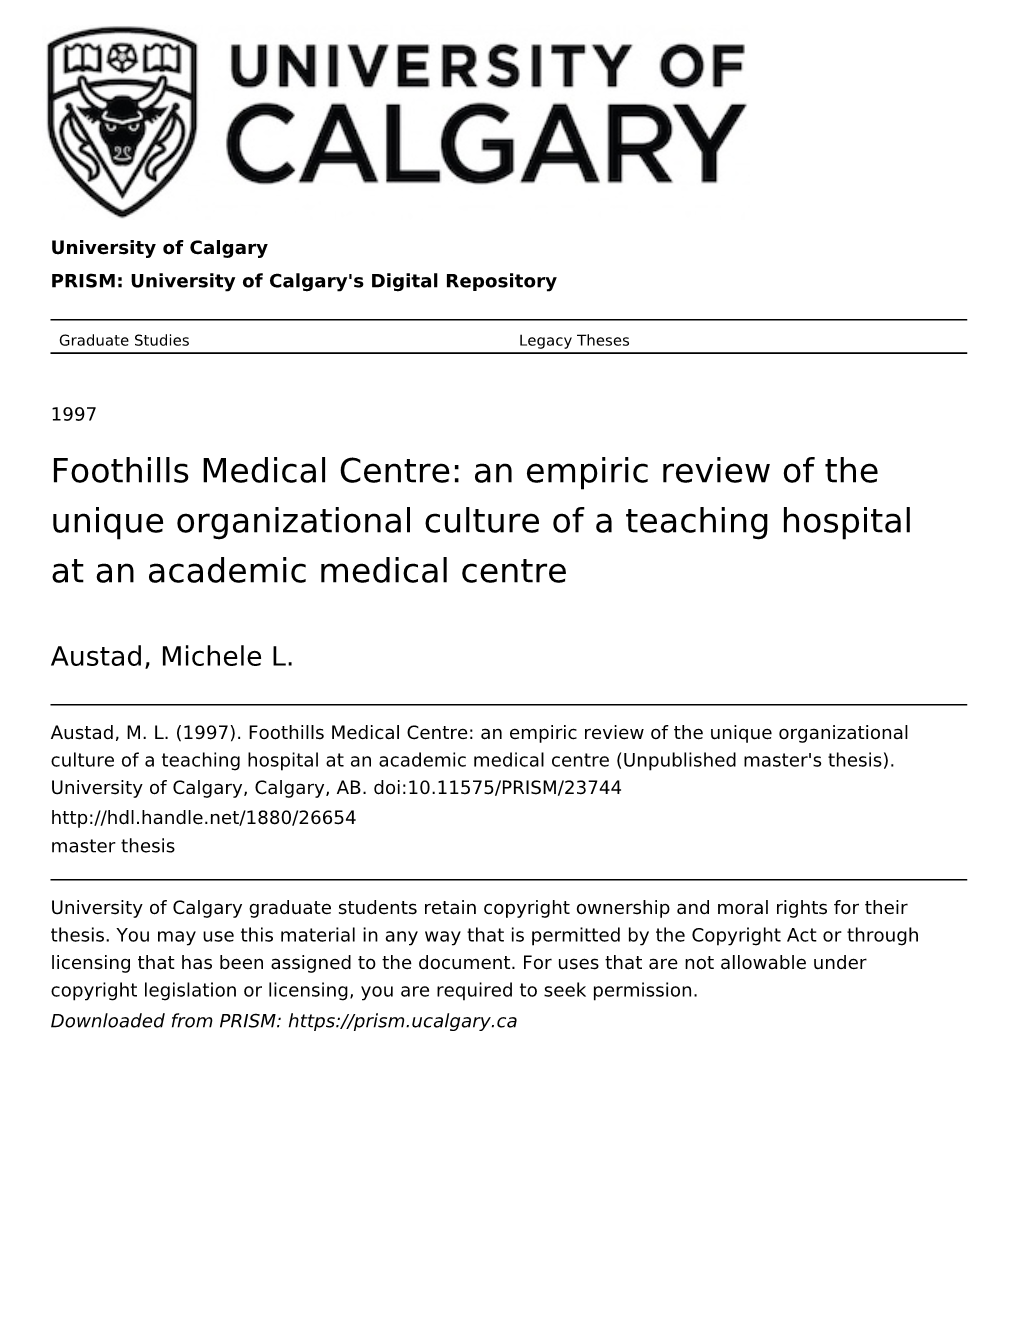 Foothills Medical Centre: an Empiric Review of the Unique Organizational Culture of a Teaching Hospital at an Academic Medical Centre